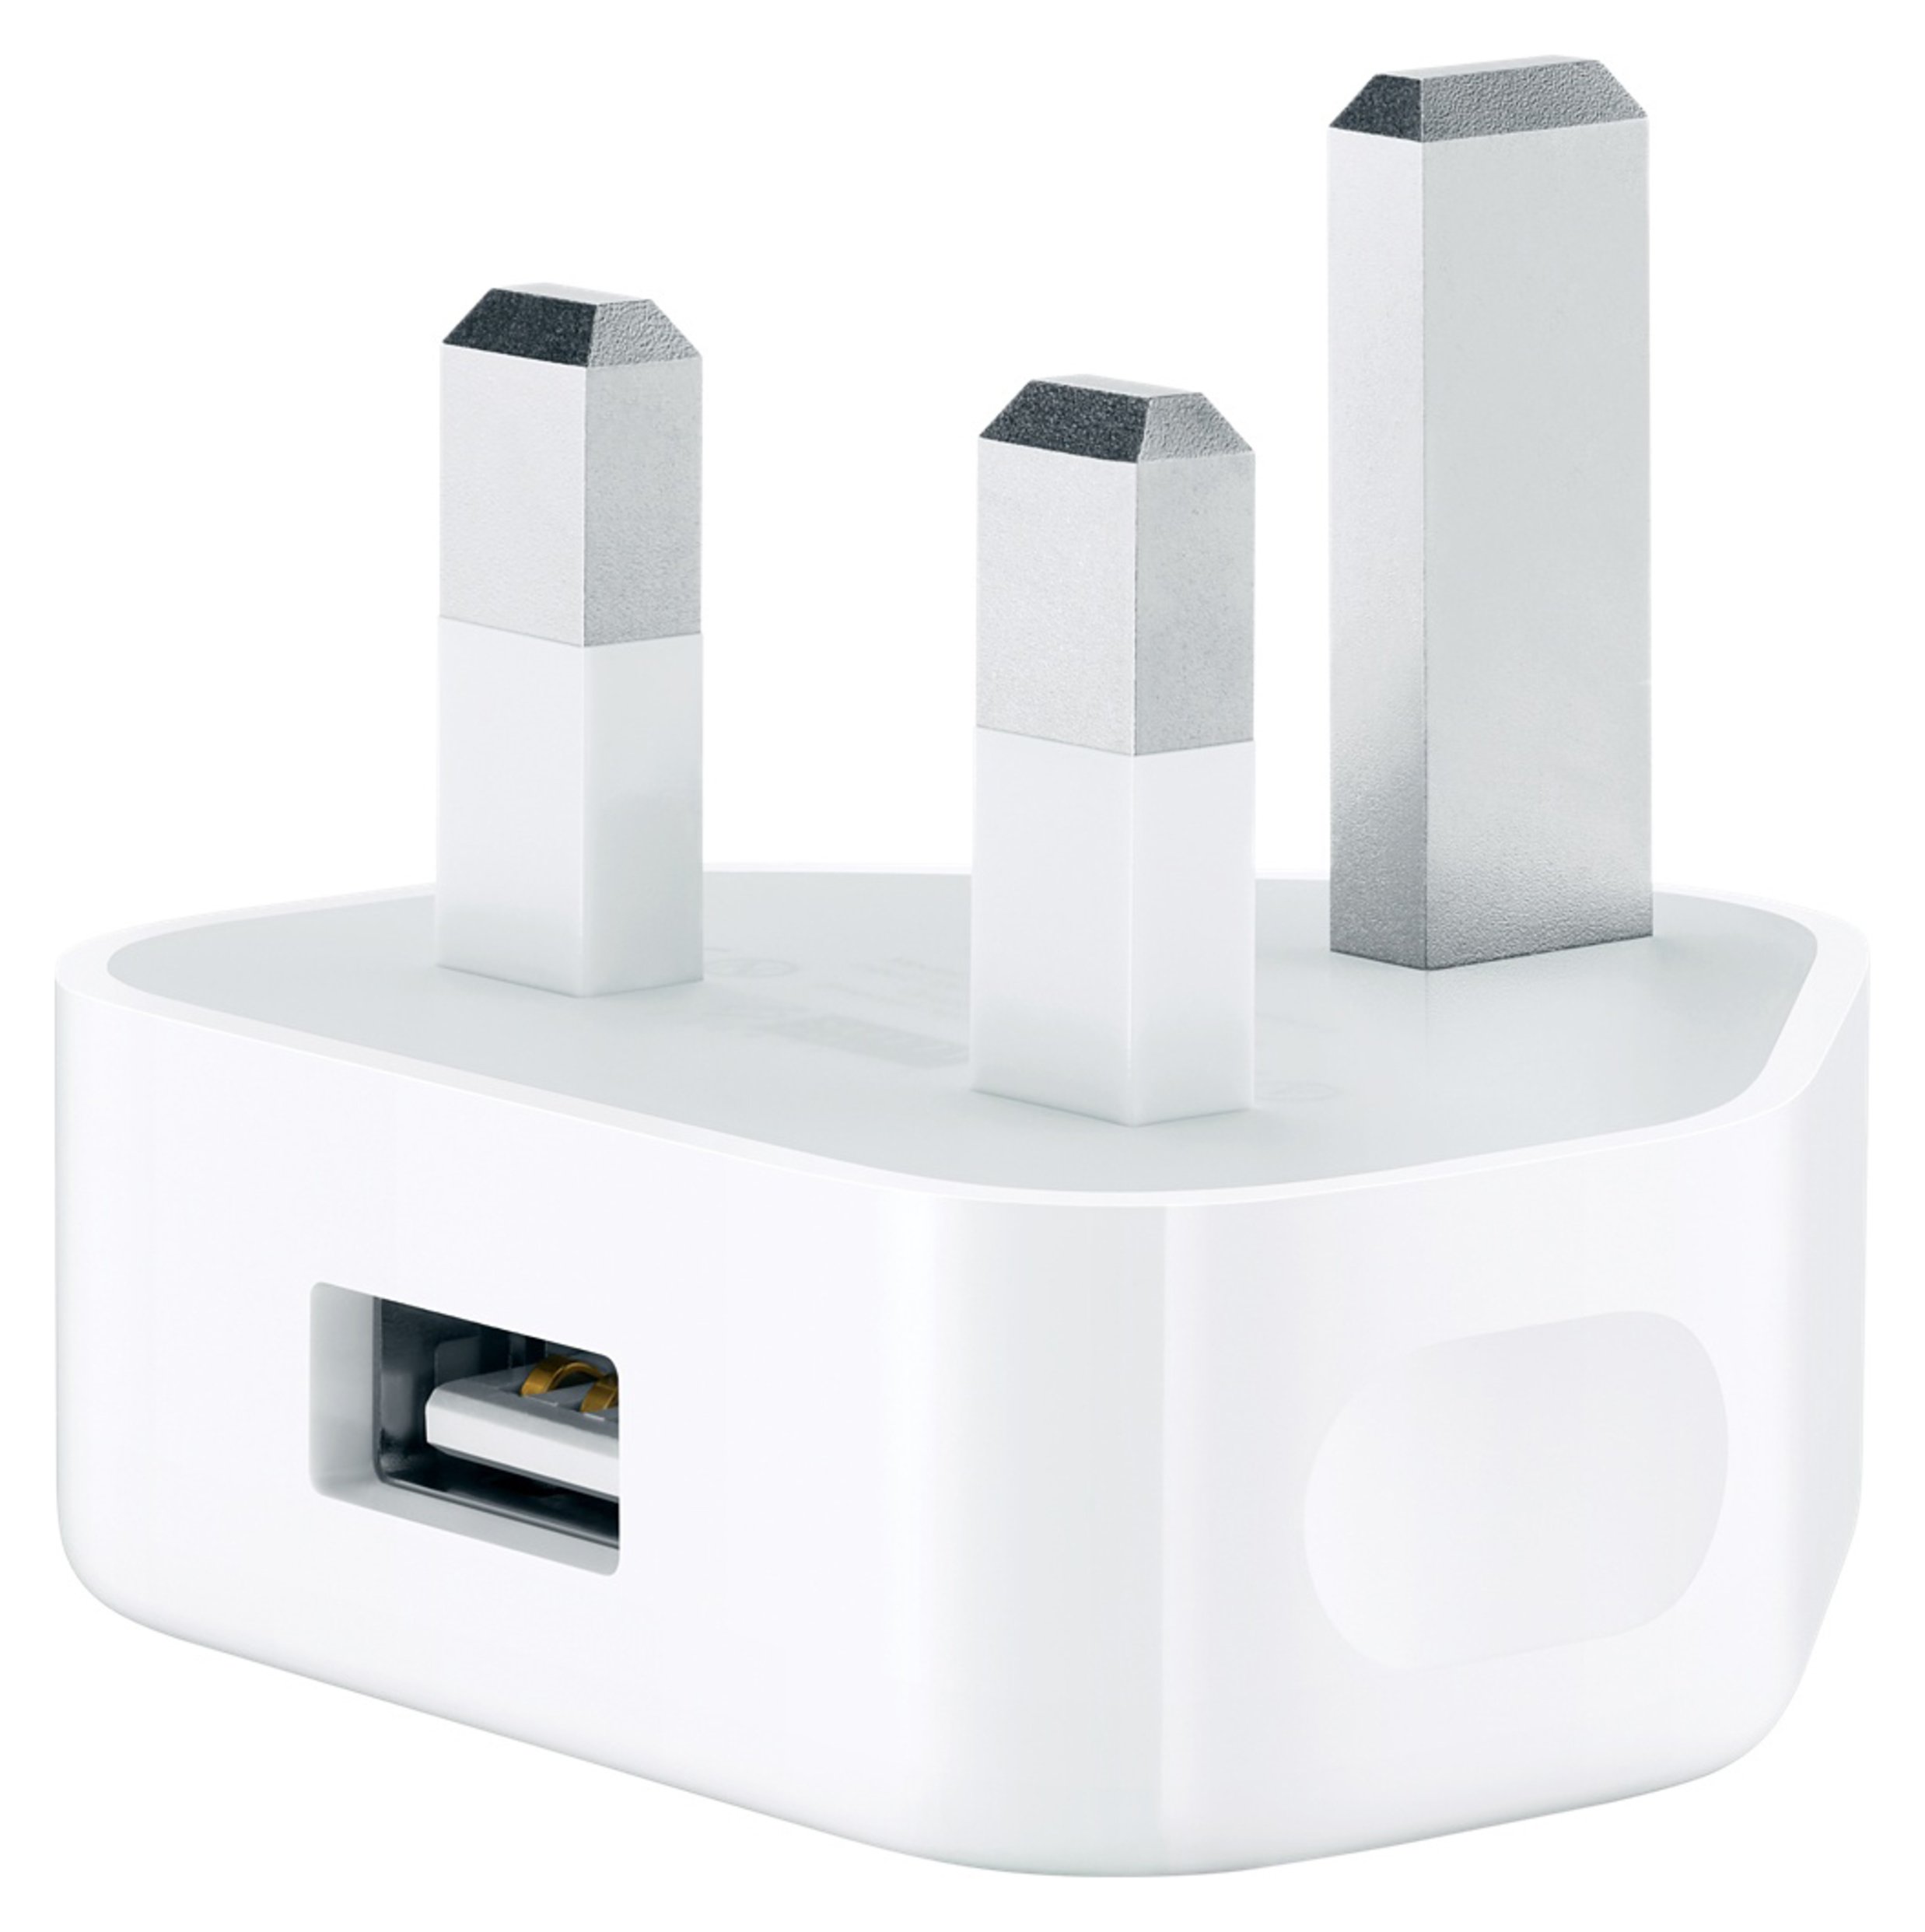 Apple 5W USB Power Adapter Review